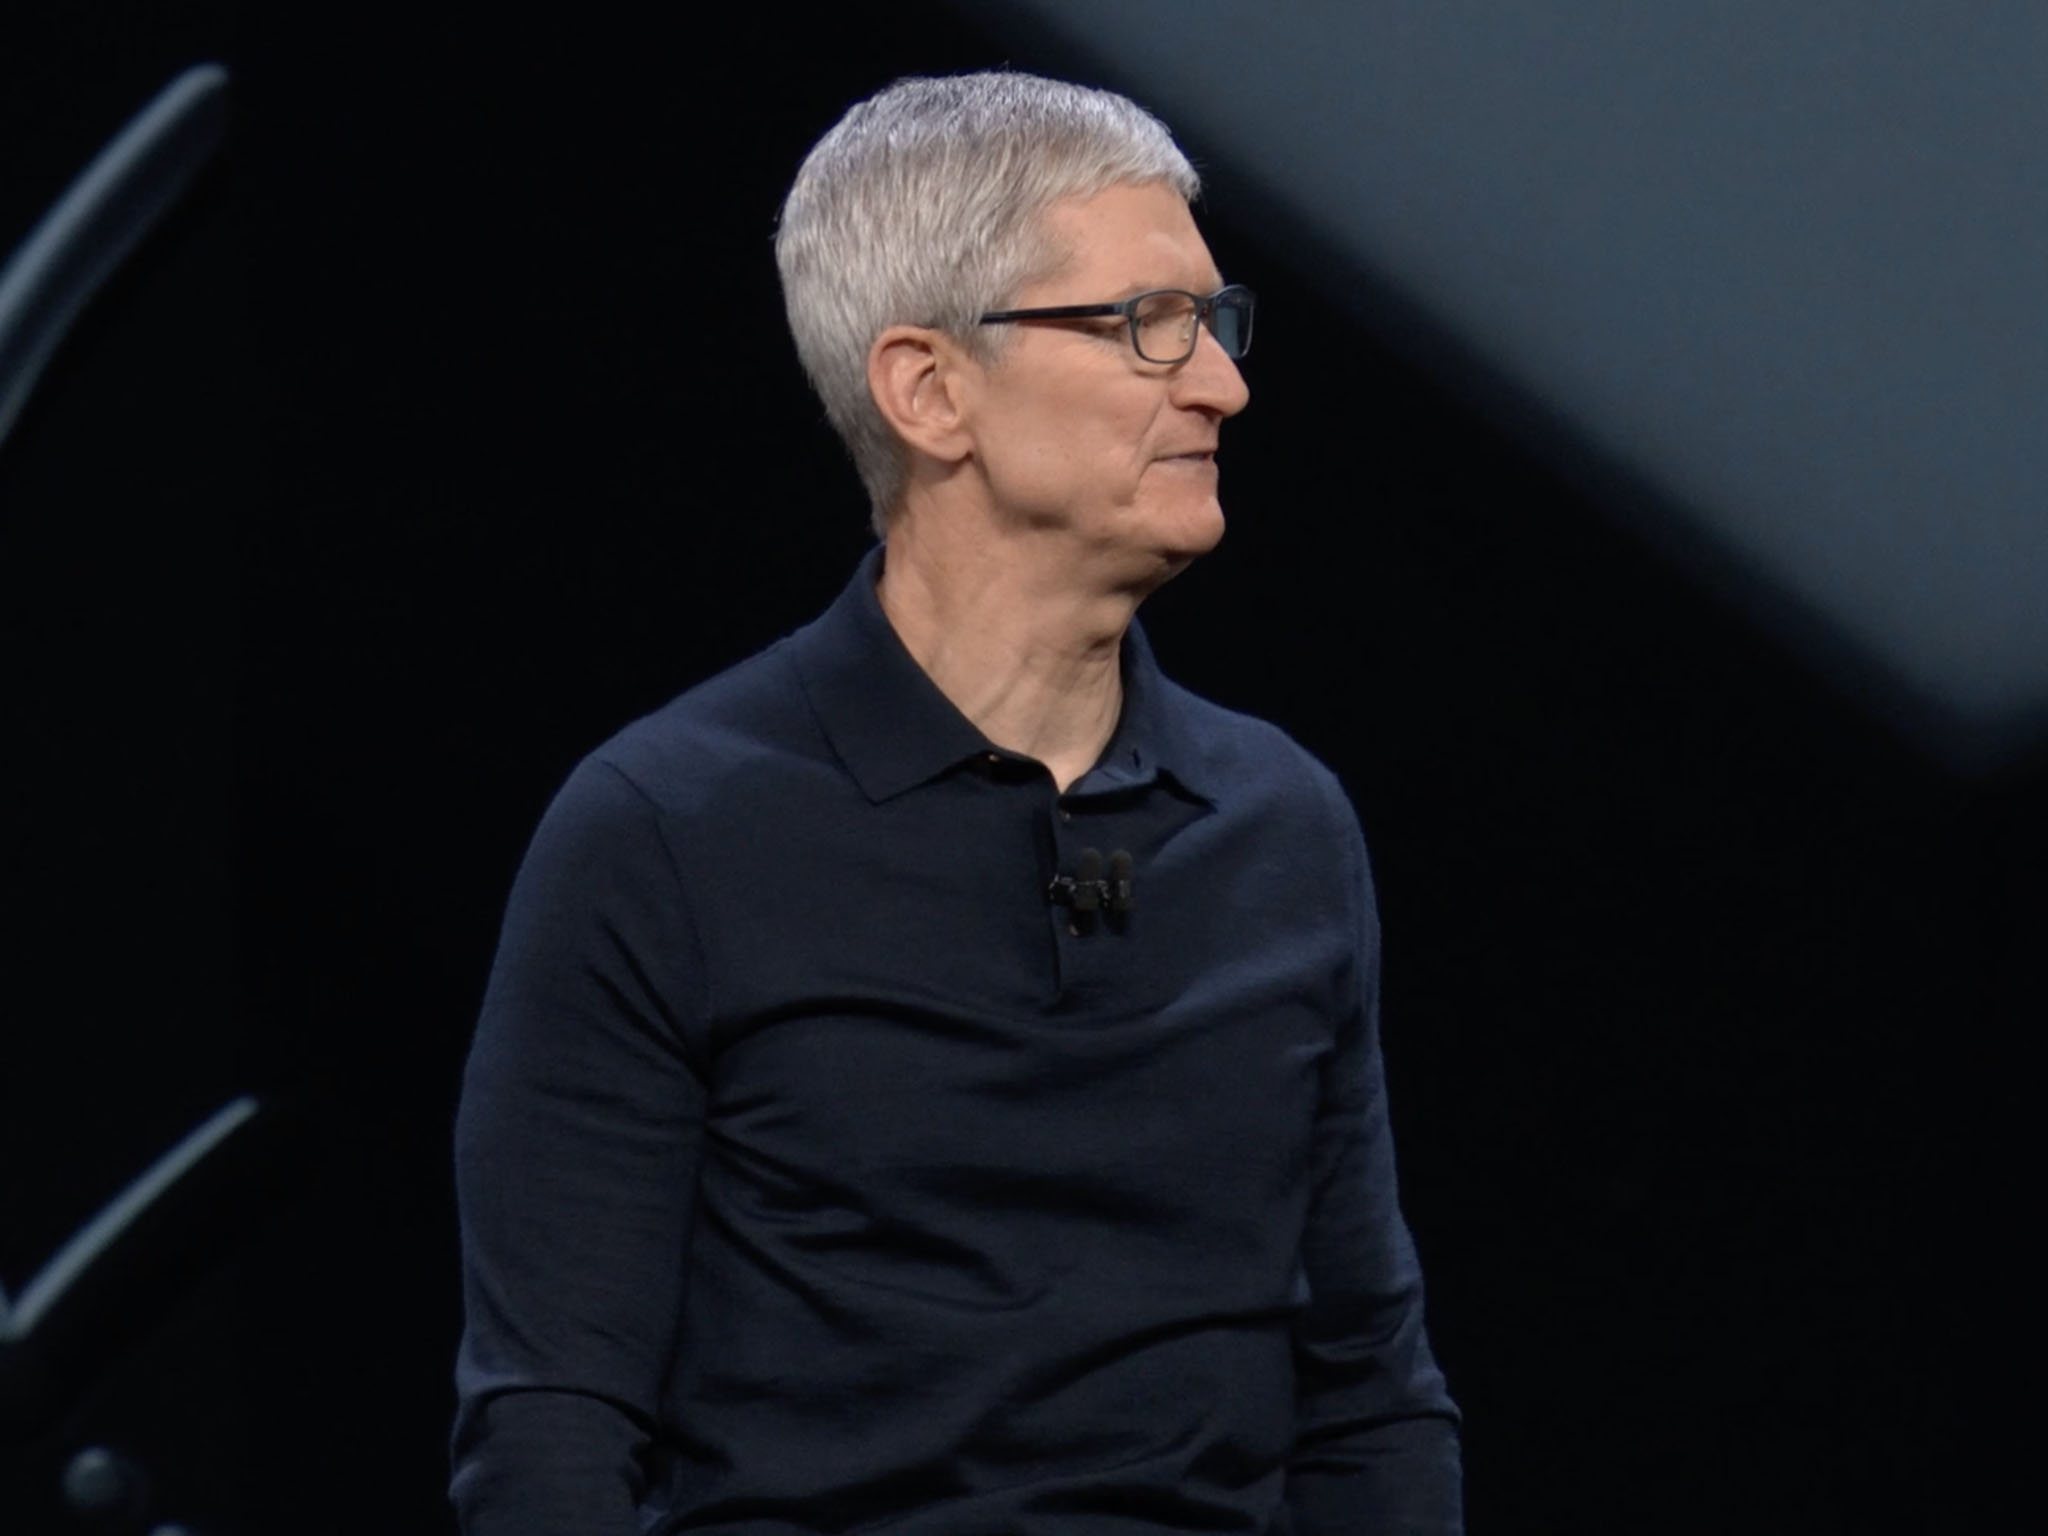 Tim Cook looks across the stage at Apple's WWDC event in 2018